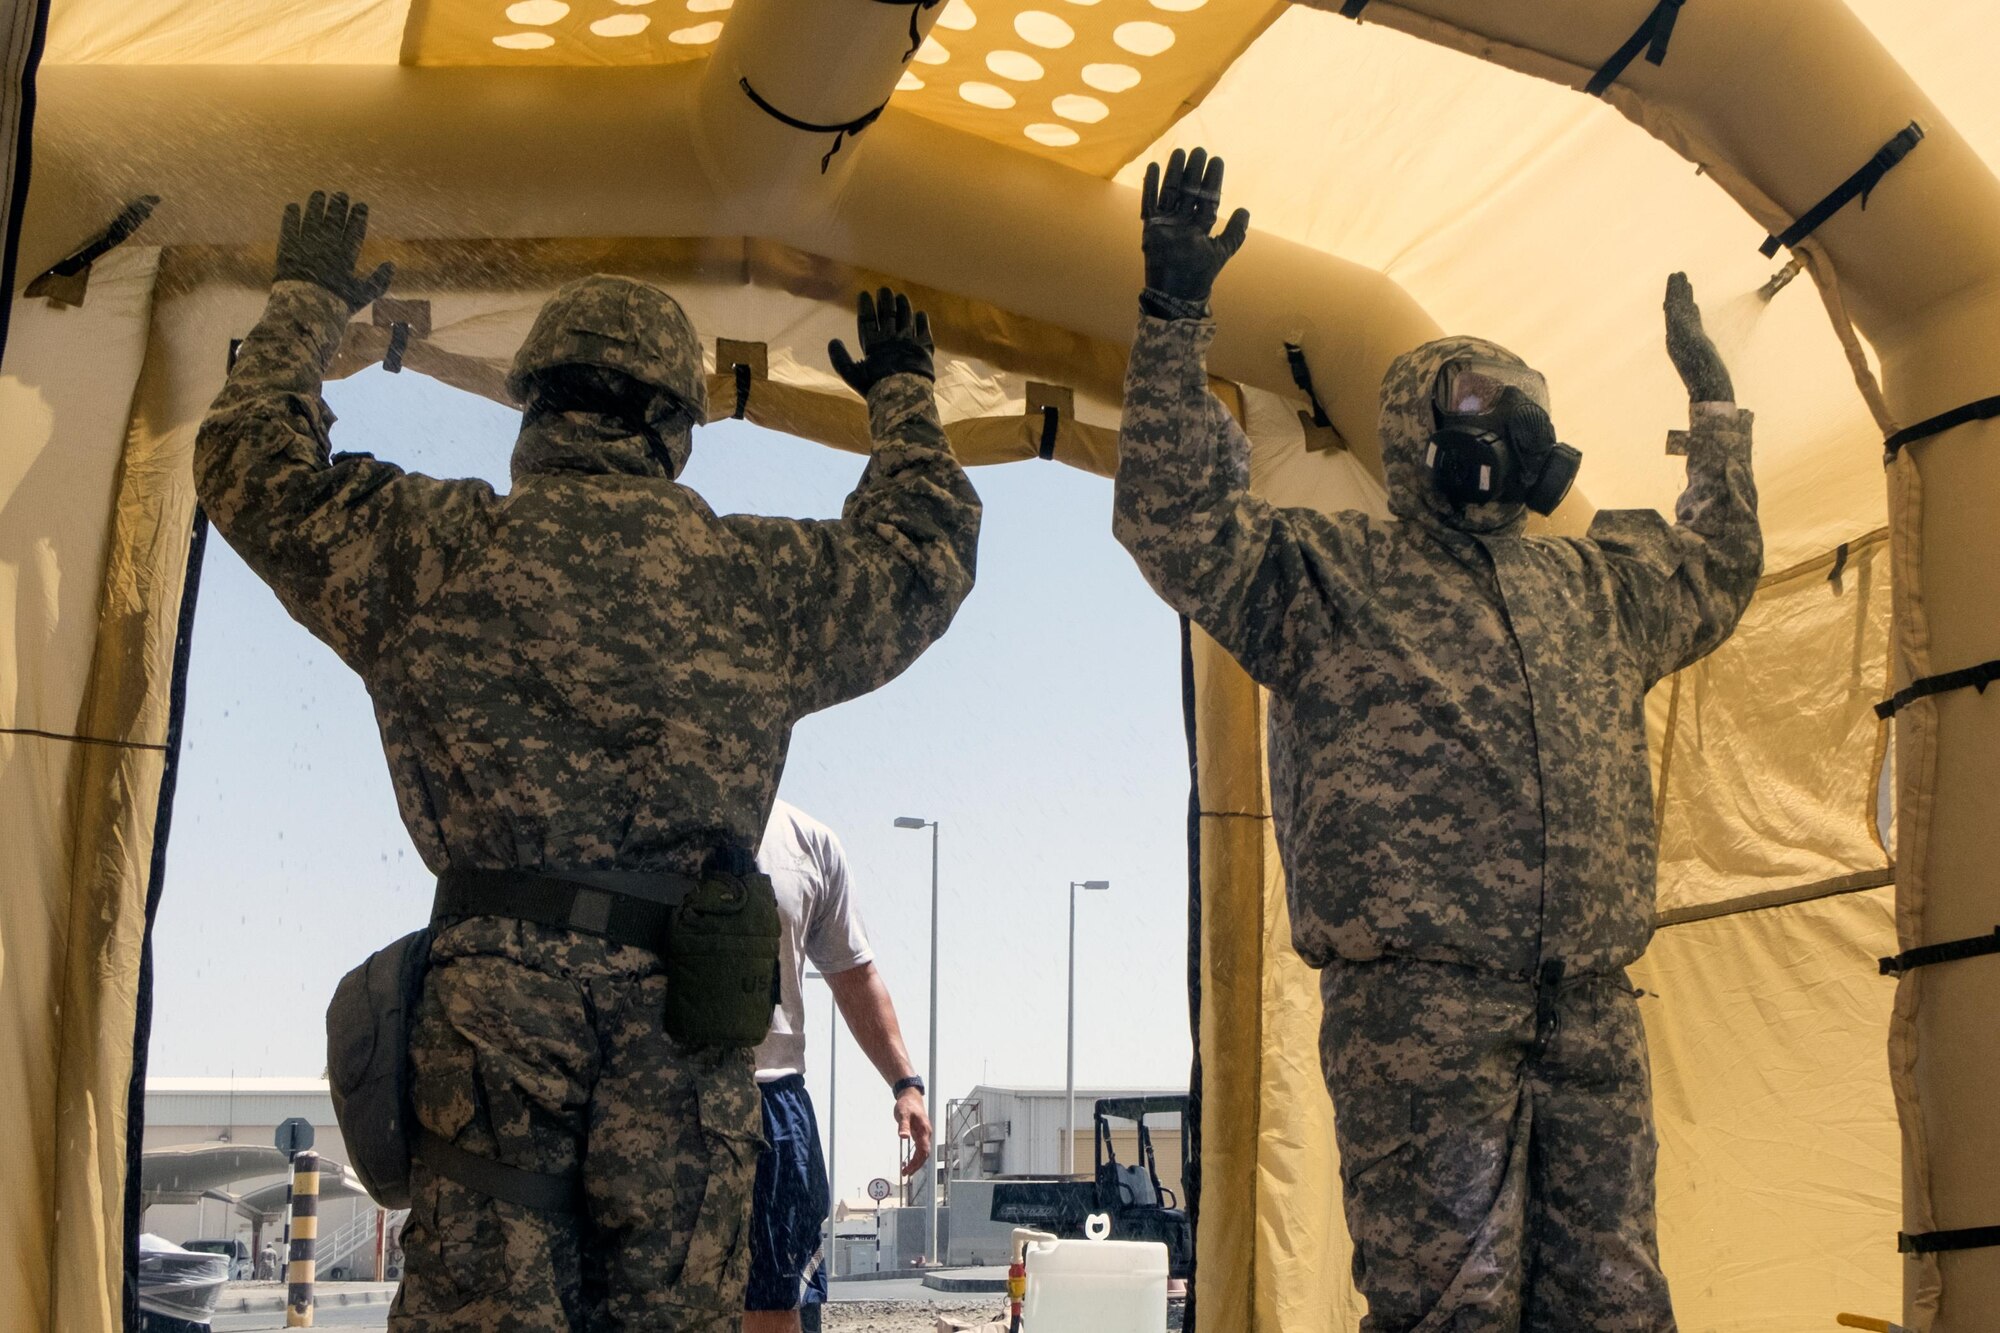 Soldiers with the 3rd Battalion, 4th Air Defense Artillery, undergo Contamination Control Area training in a Lightweight Inflatable Decontamination System June 8, 2017, at an undisclosed location in southwest Asia. Personnel are taken to a CCA to be decontaminated in a safe environment. (U.S. Air Force photo by Senior Airman Preston Webb)